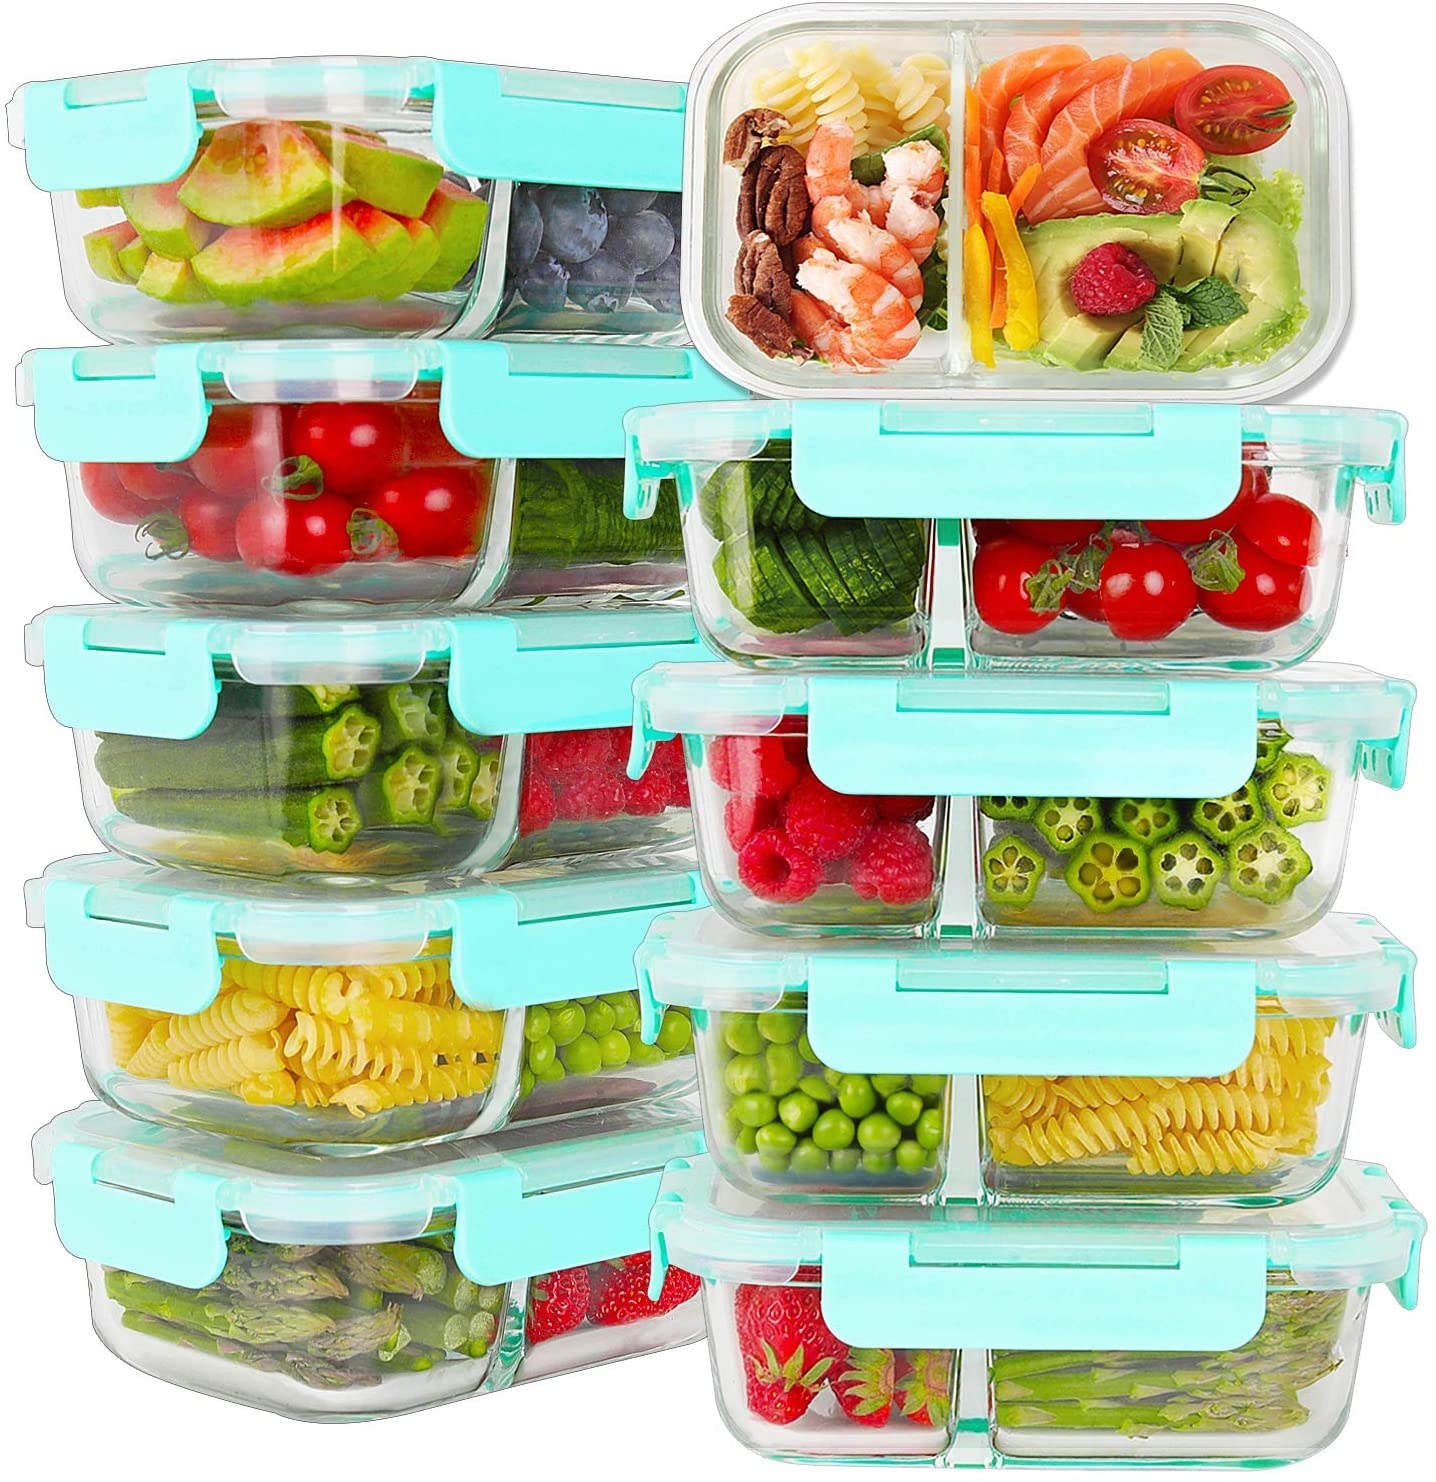 Lokyo Split Compartment Storage Lunch Box Meal Prep Containers